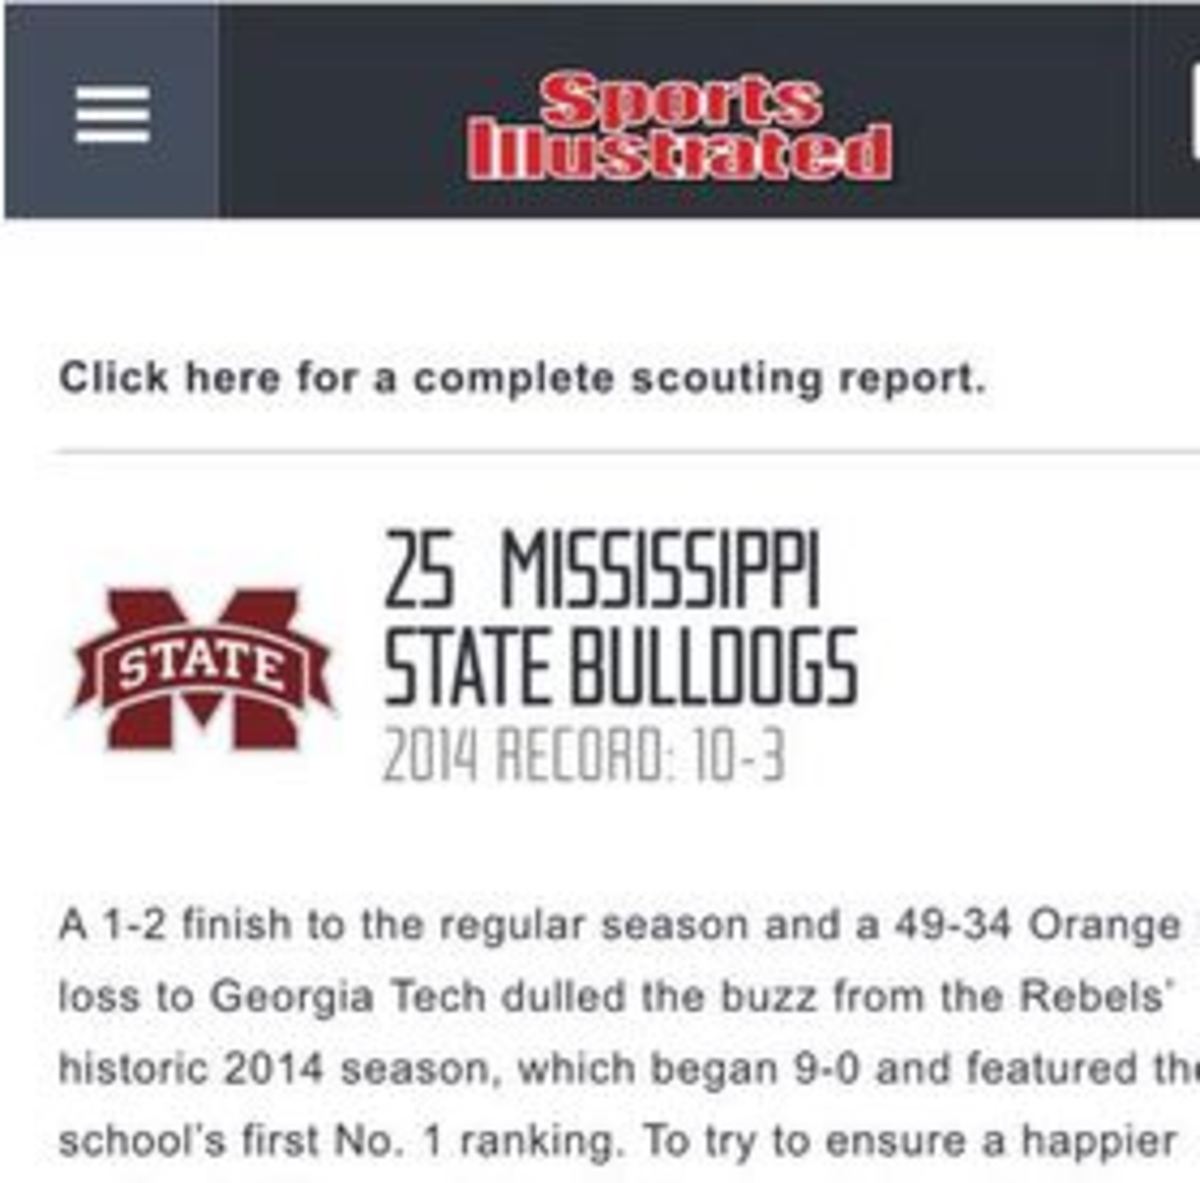 Sports Illustrated calls the Mississippi State Bulldogs "the rebels" in article typo.